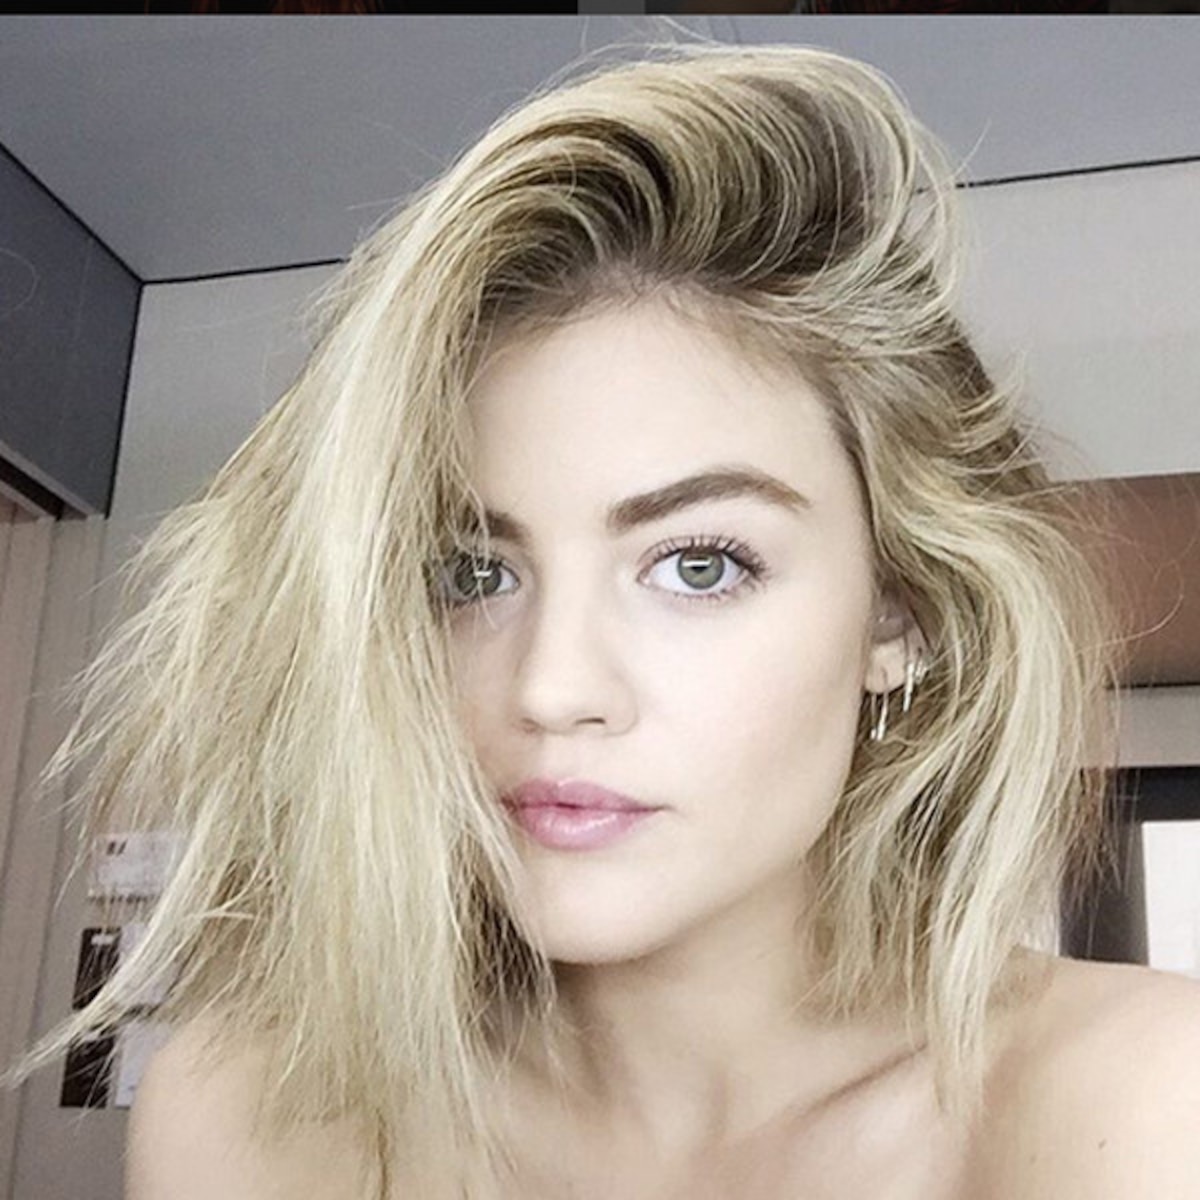 cherie fields recommends lucy hale leaked images pic